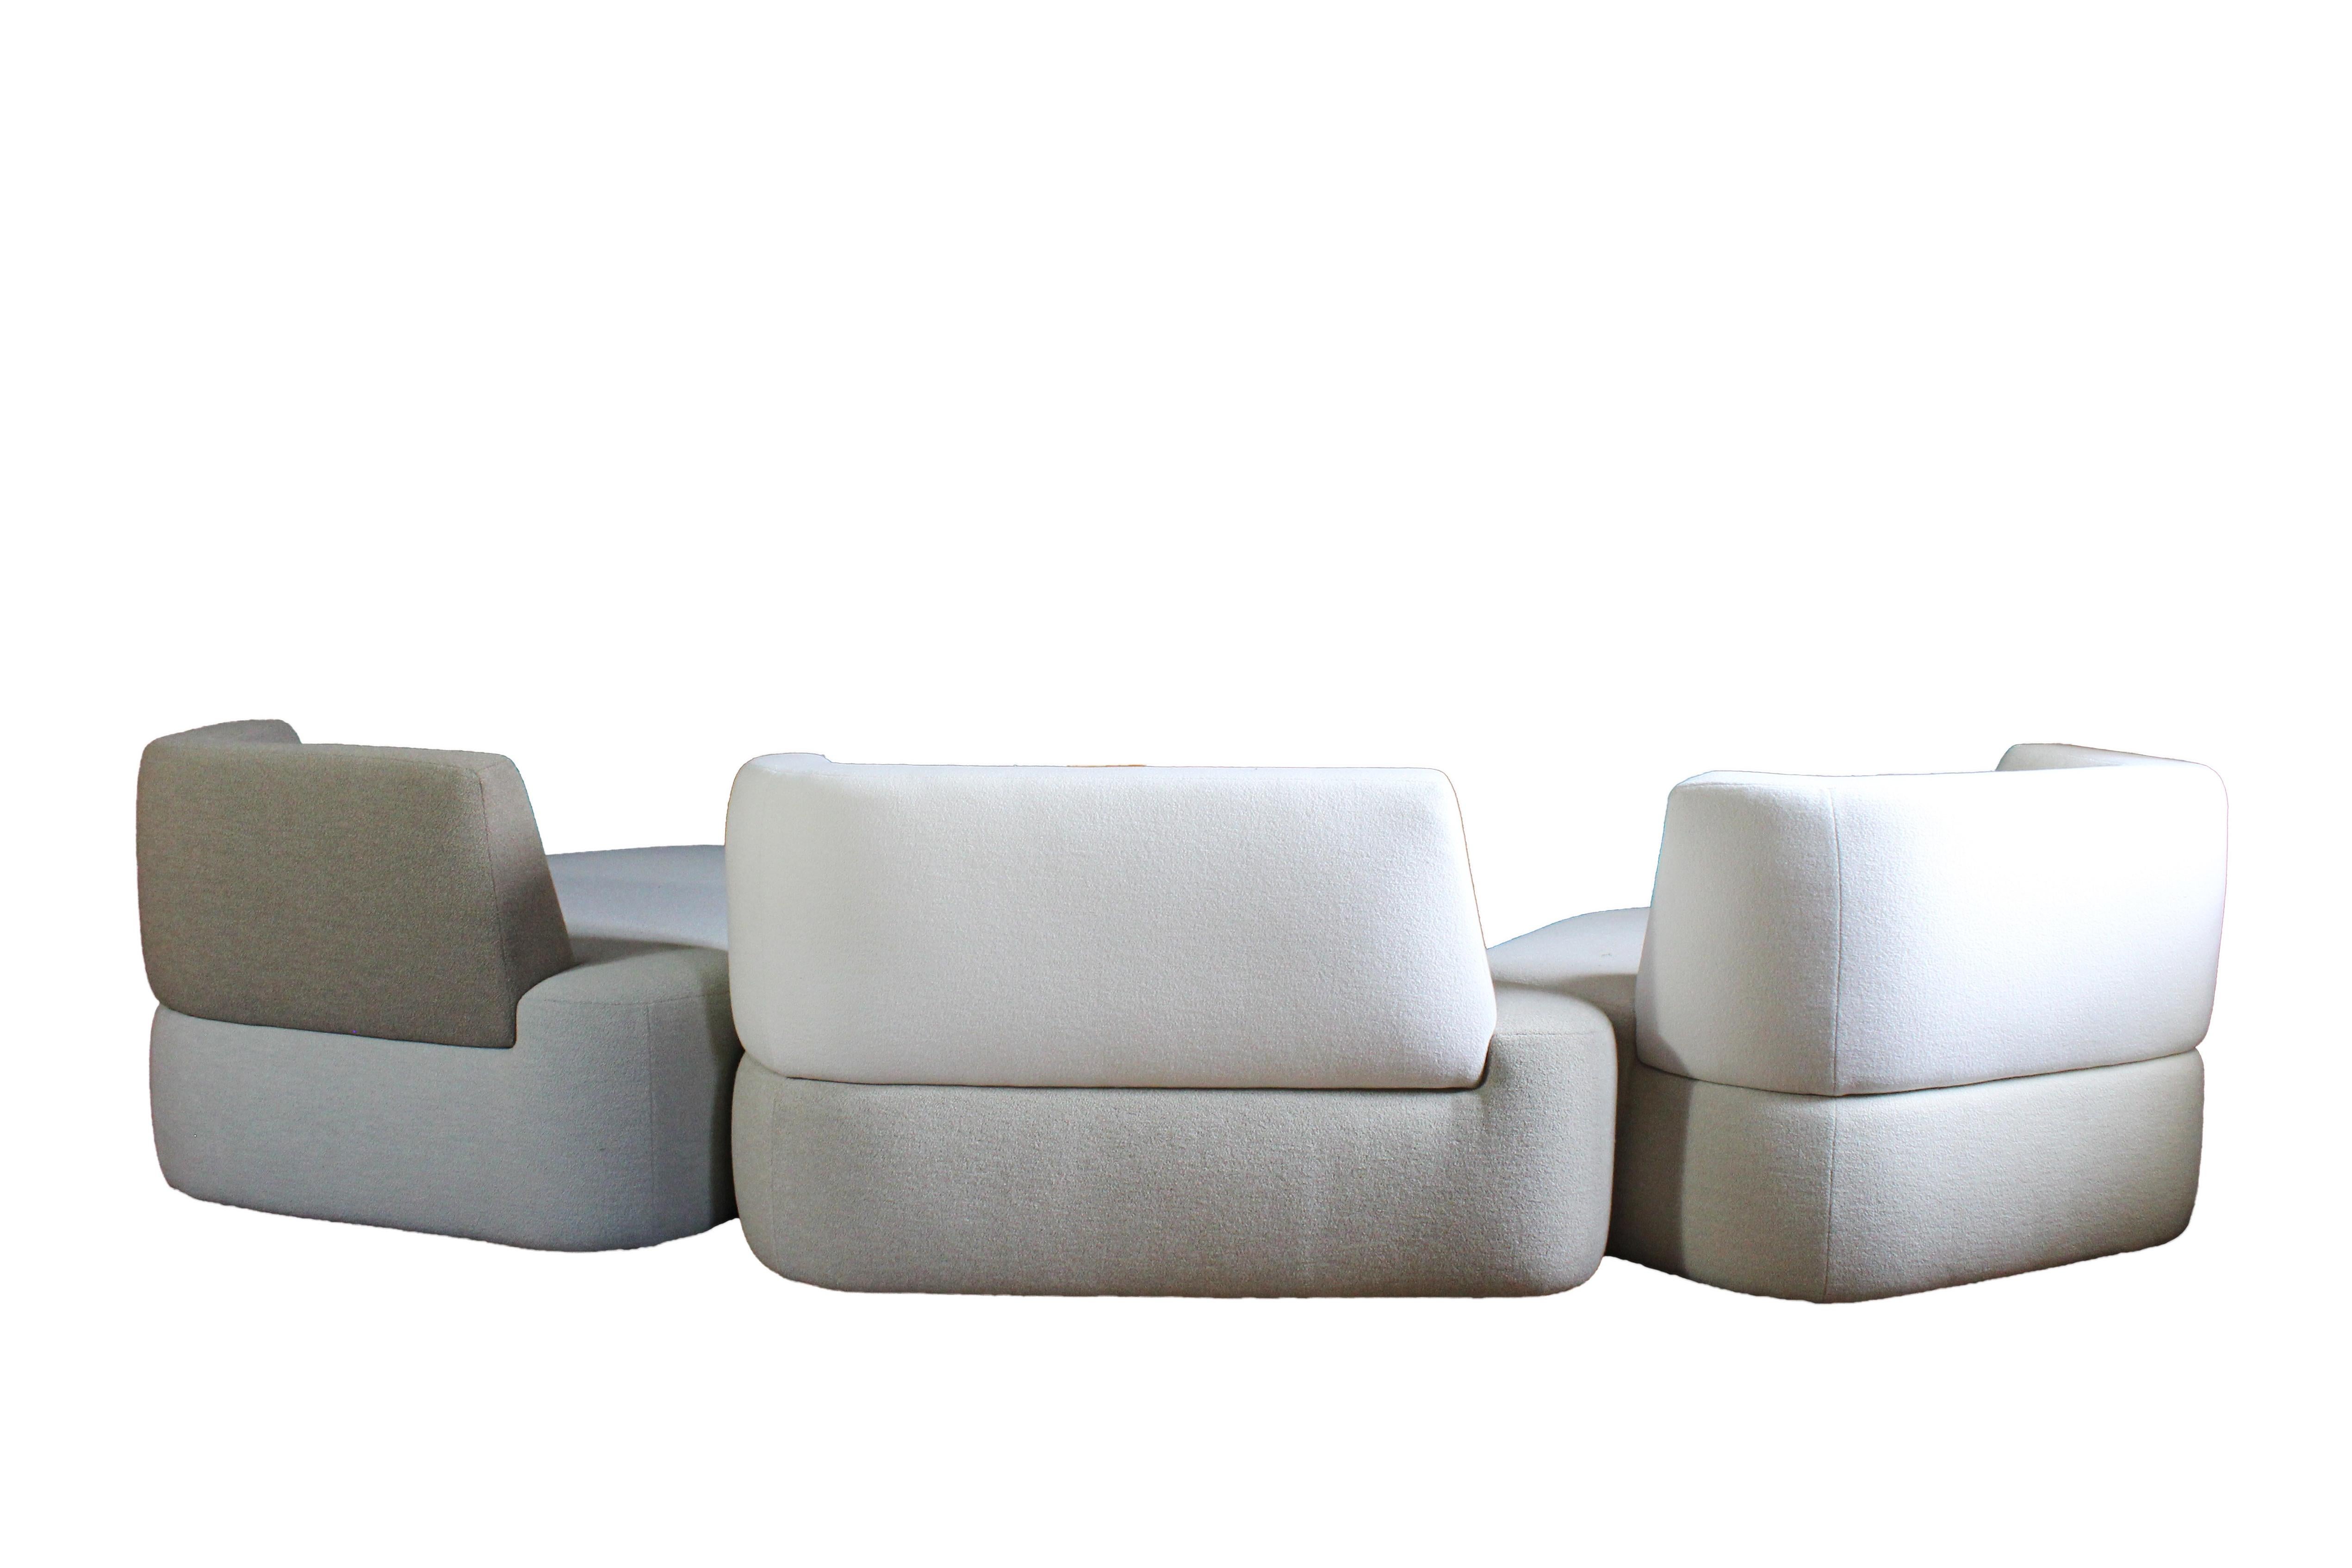 Hand-Crafted Sofa Pierre in White, Cream, Brown Wool Handmade in France Customizable For Sale